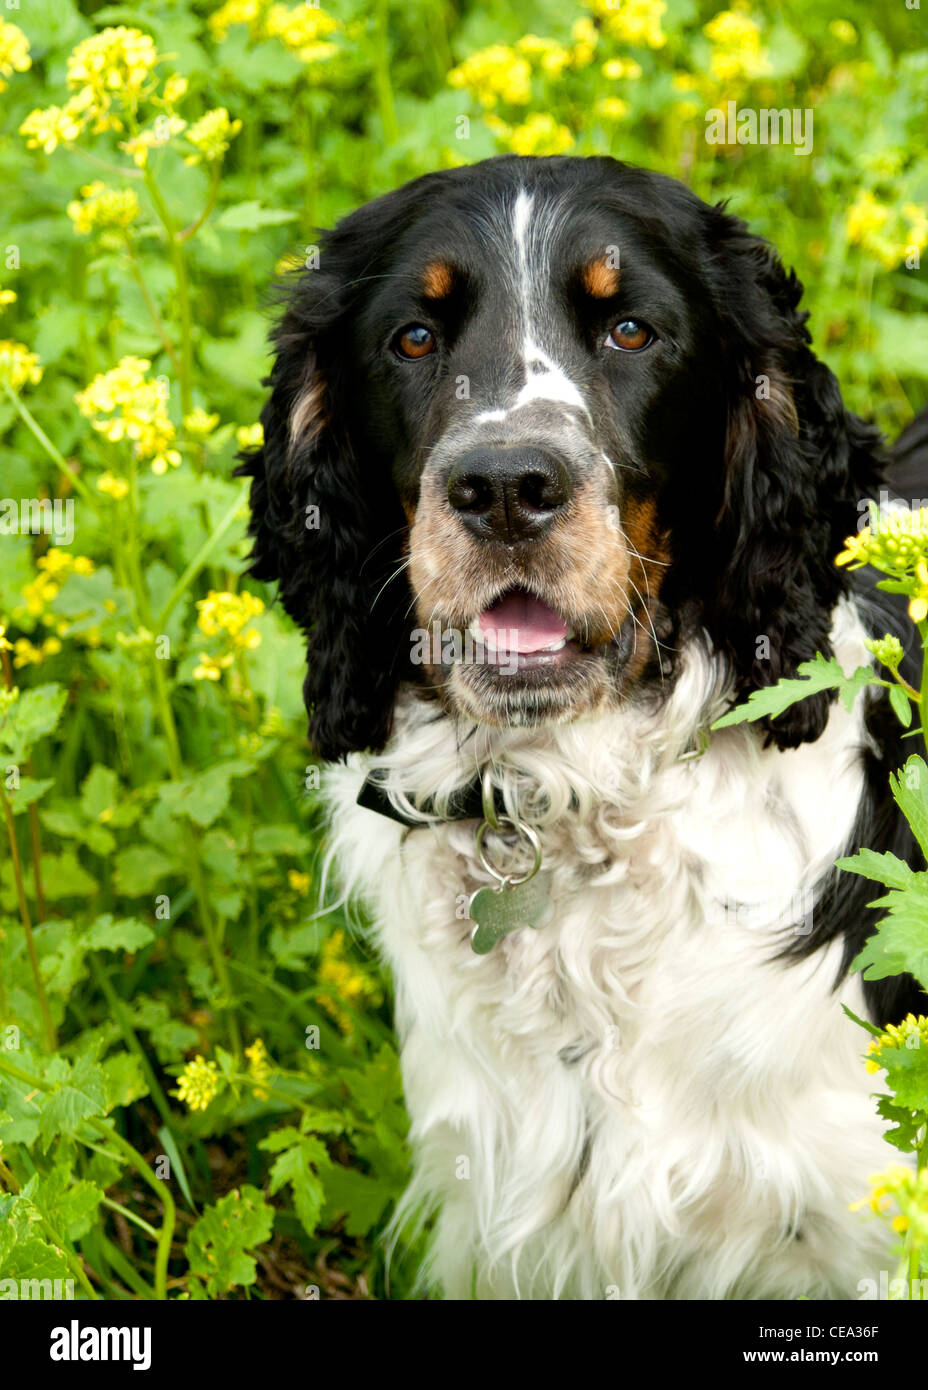 Indie a tri-colored English Springer Spaniel dog. Outdoor fun, relaxing in a field of flowers. Stock Photo